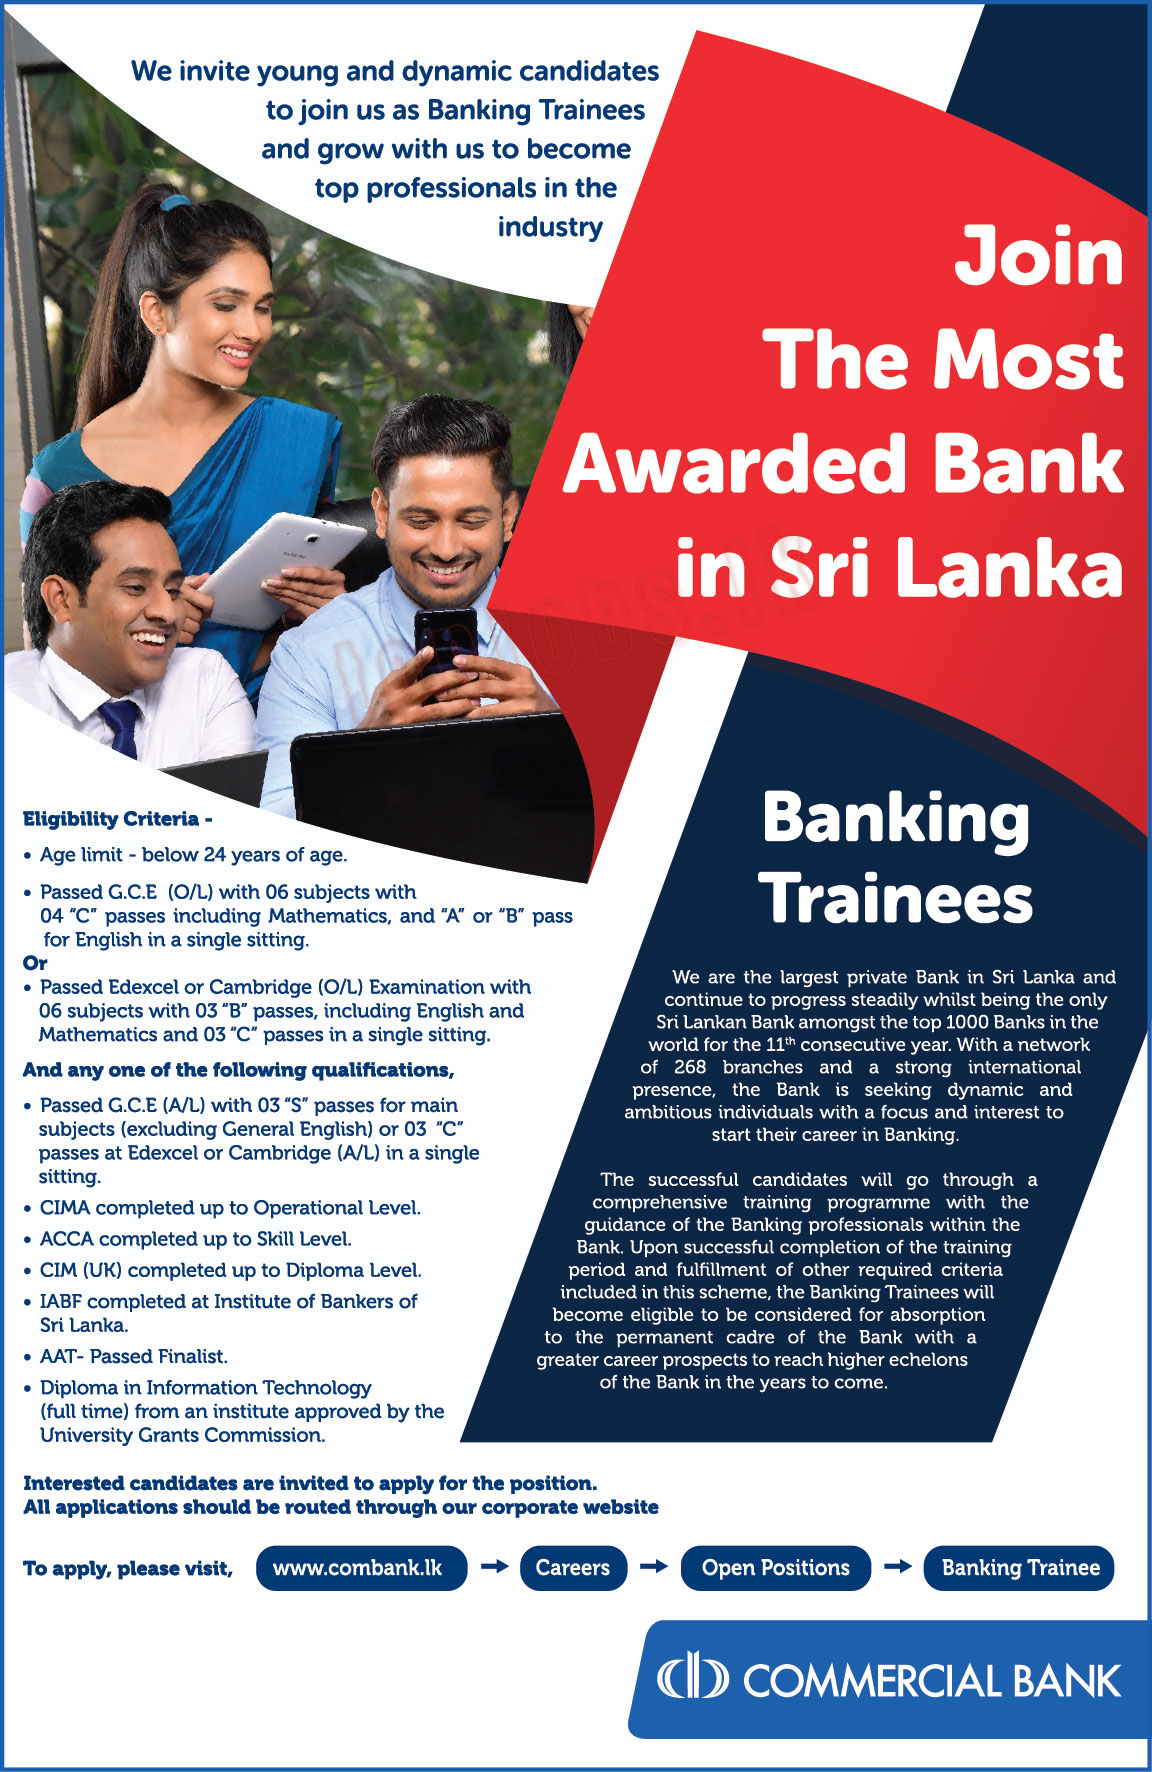 Banking Trainees Vacancies at Commercial Bank of Ceylon